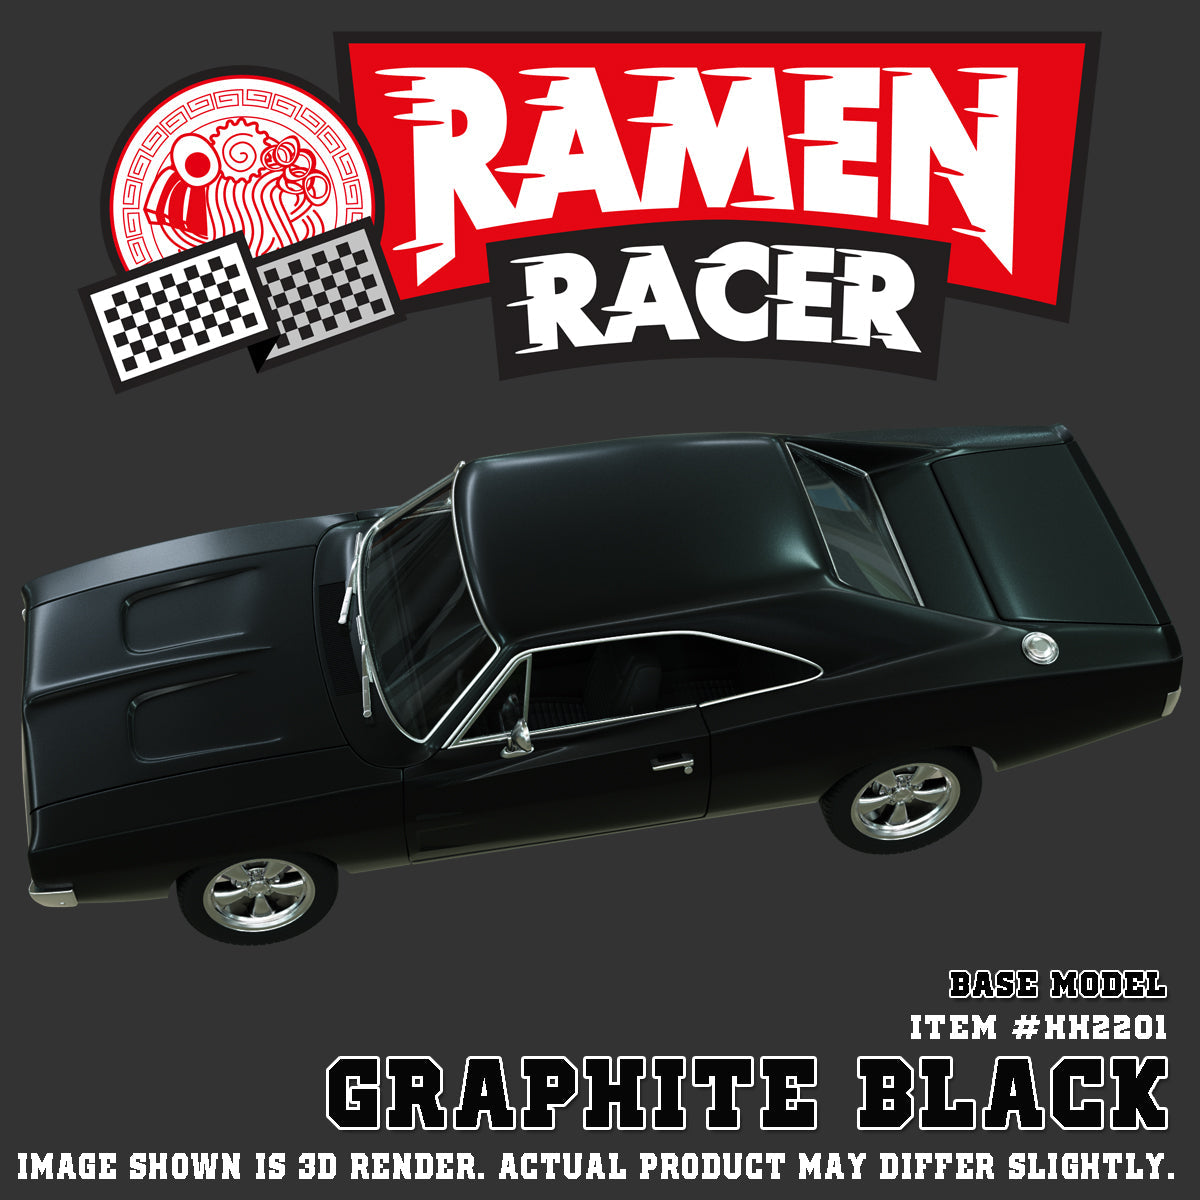 ITEM #HH2201A - RAMEN RACER (GRAPHITE BLACK) comes with INTERCHANGE & INFERNO PACKS